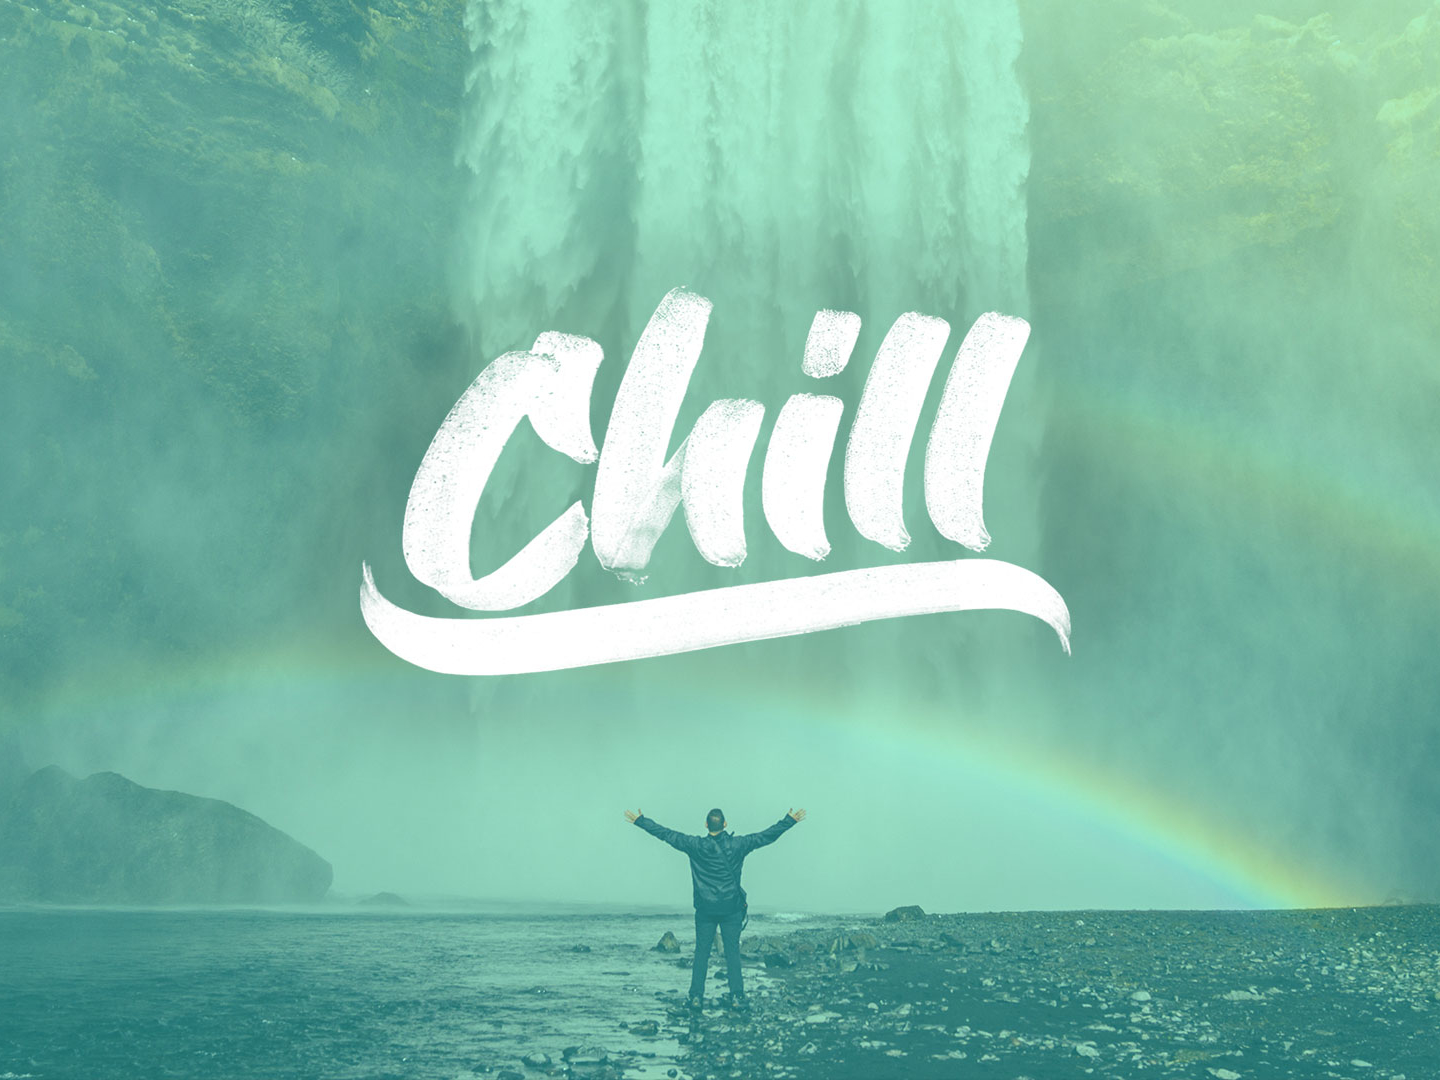 Chill typography test by BR on Dribbble